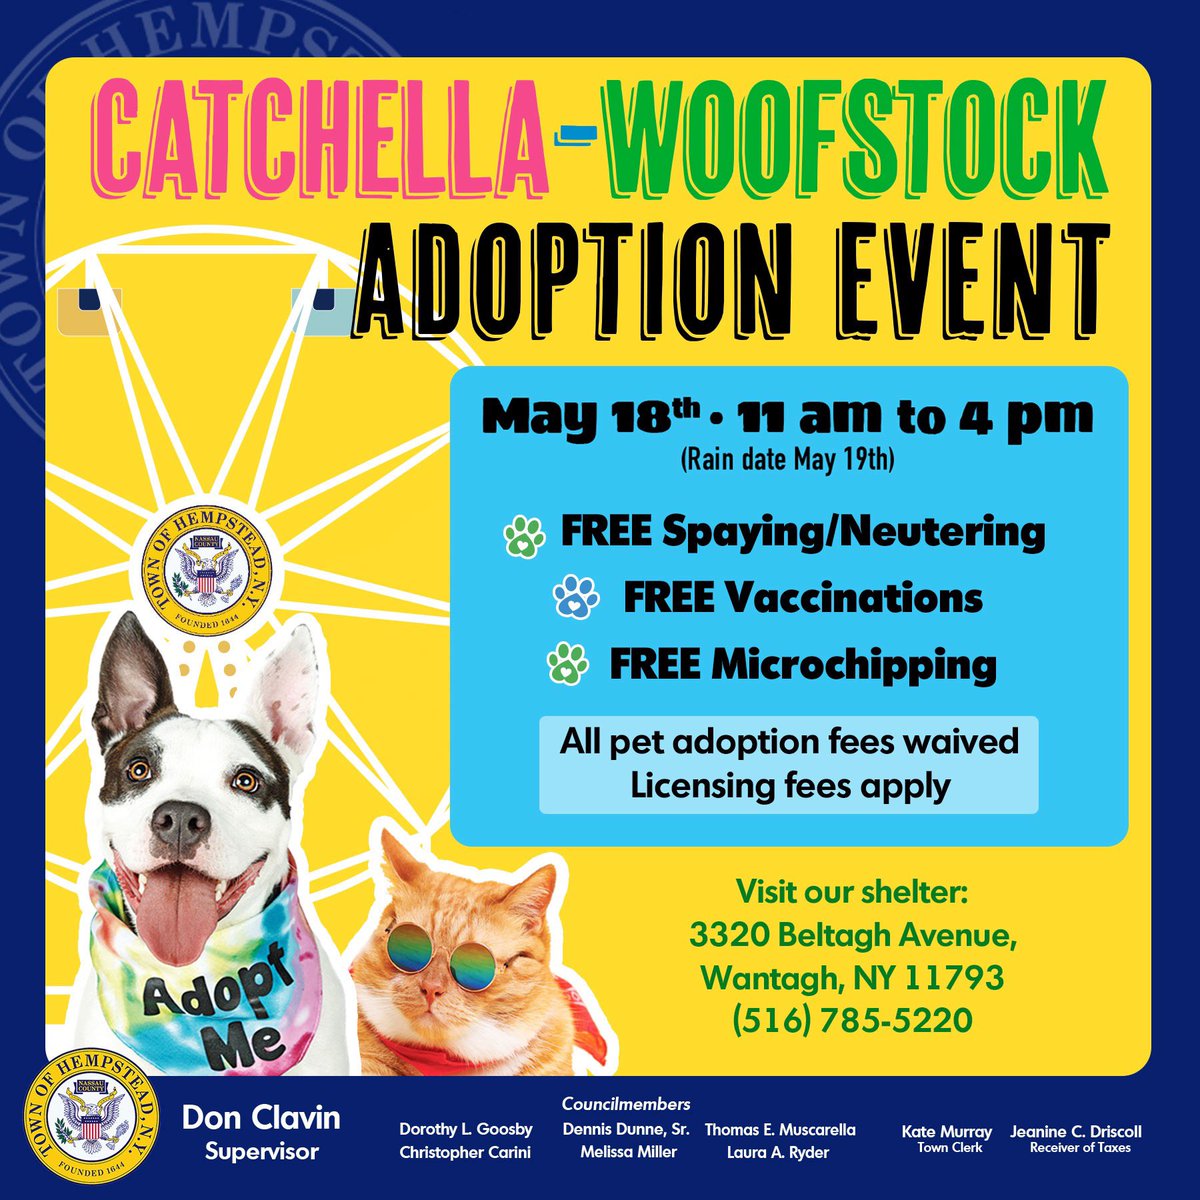 It's #FestivalSeason at the ToH Animal Shelter! @TOHClavin invites you to find your new best friend at our Catchella - Woofstock Adoption Event on May 18th from 11am to 4pm at the town's Animal Shelter in #Wantagh. 🐶🐱 (Unfortunatley Lil' Bow Wow and Doja Cat were booked)